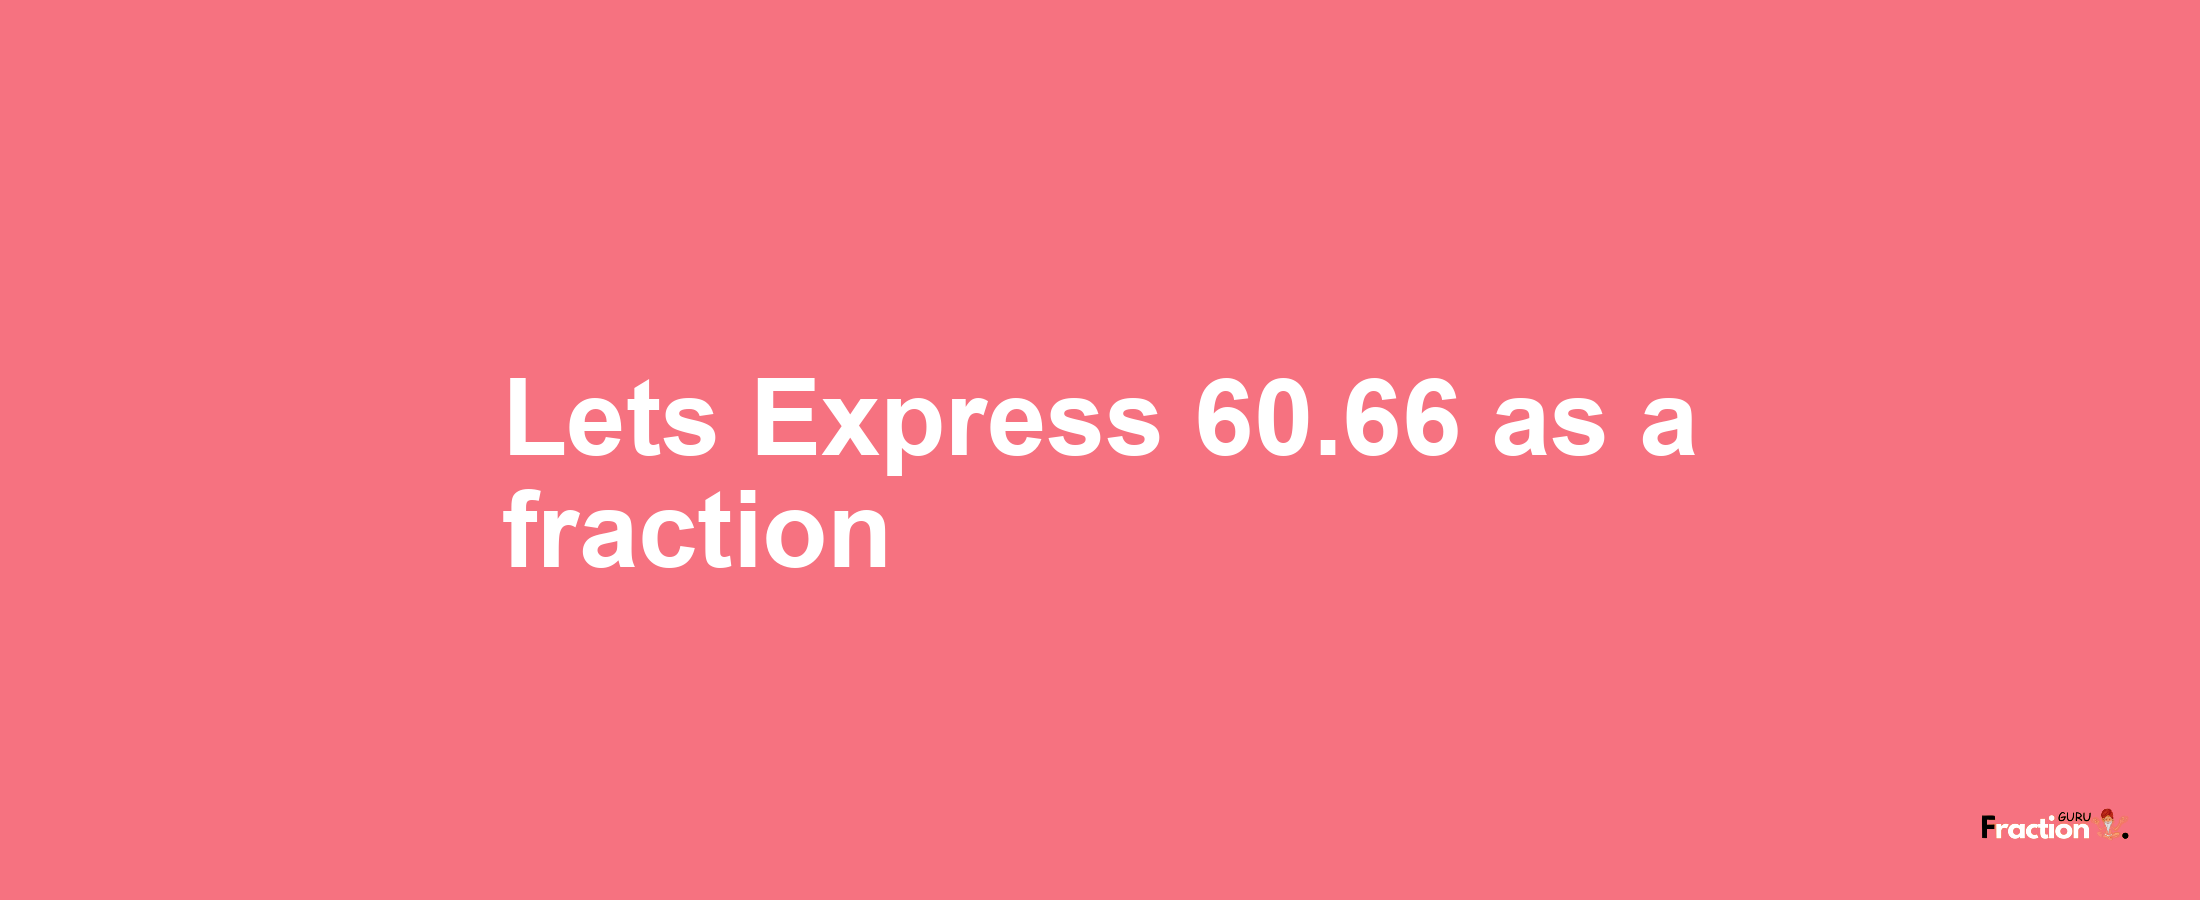 Lets Express 60.66 as afraction